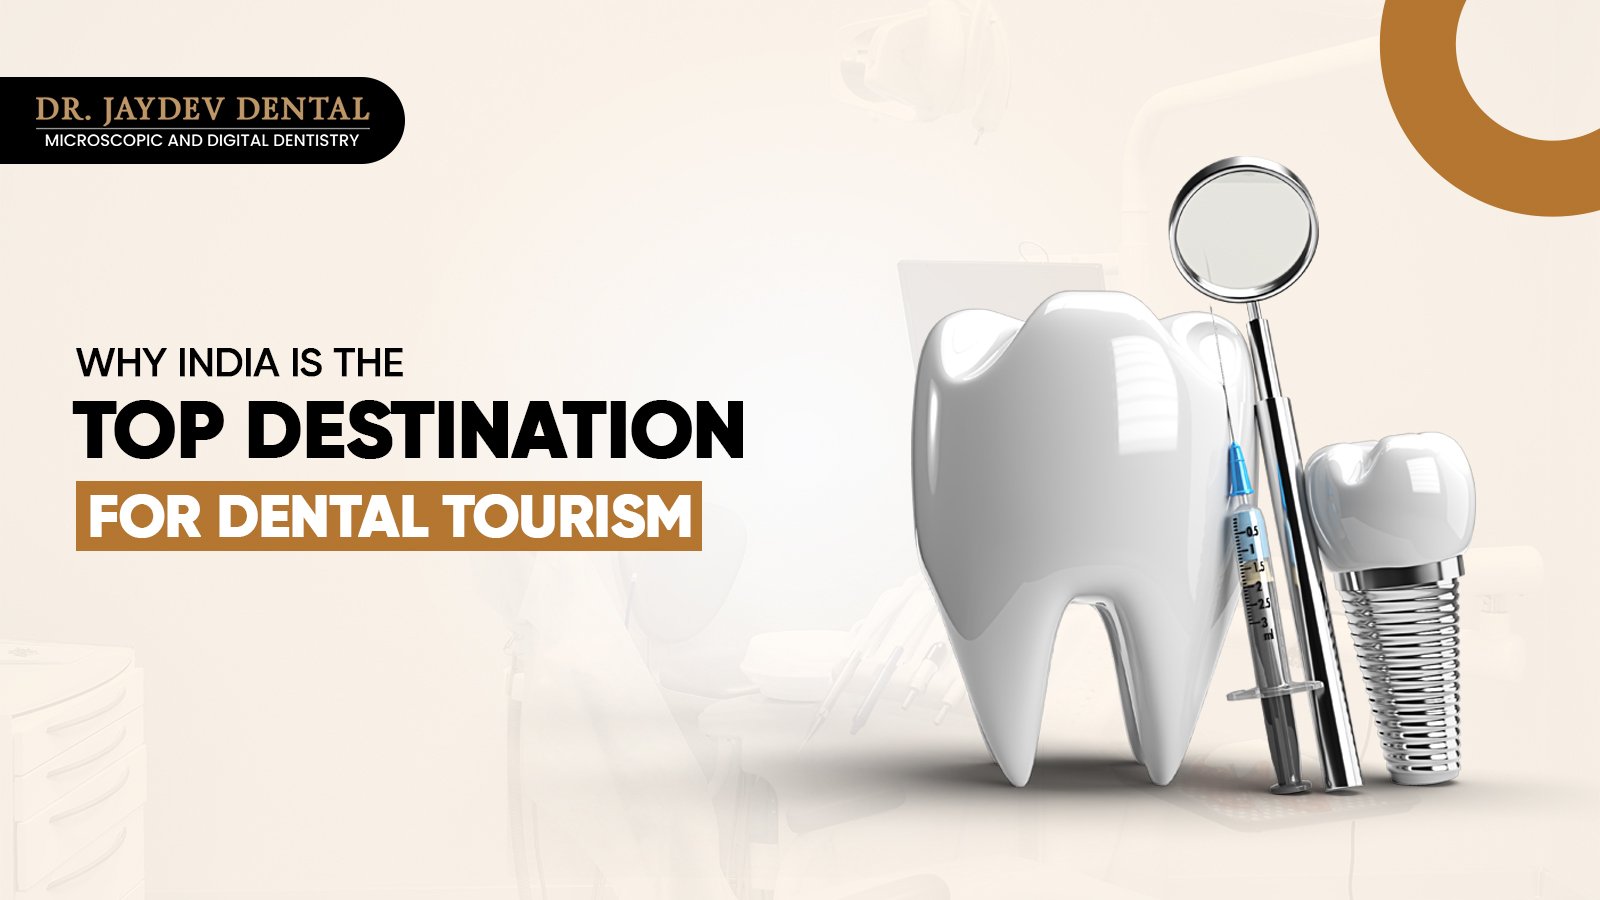 Why India is the Top Destination for Dental Tourism